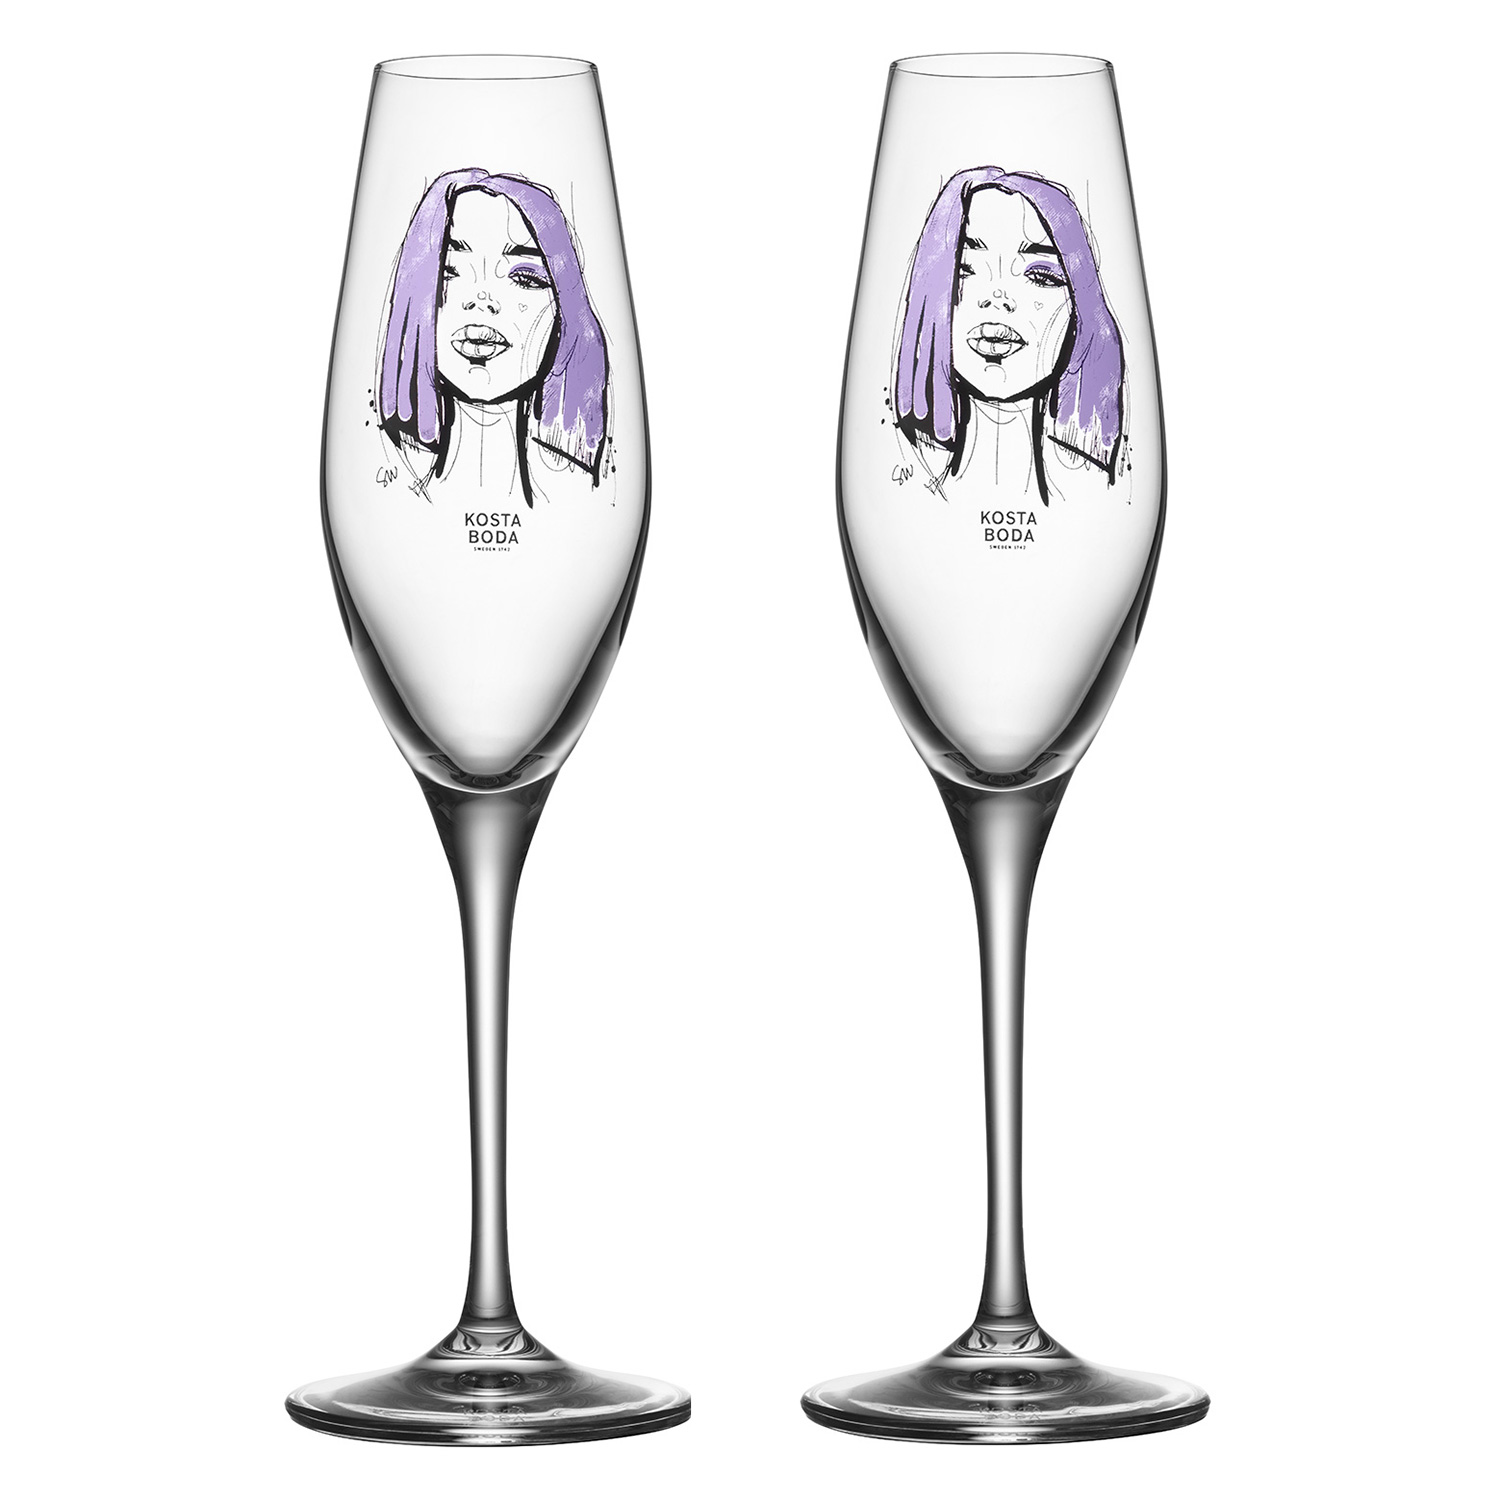 All About You Champagne 23 cl 2-pack, Forever Mine - Kosta Boda @ RoyalDesign